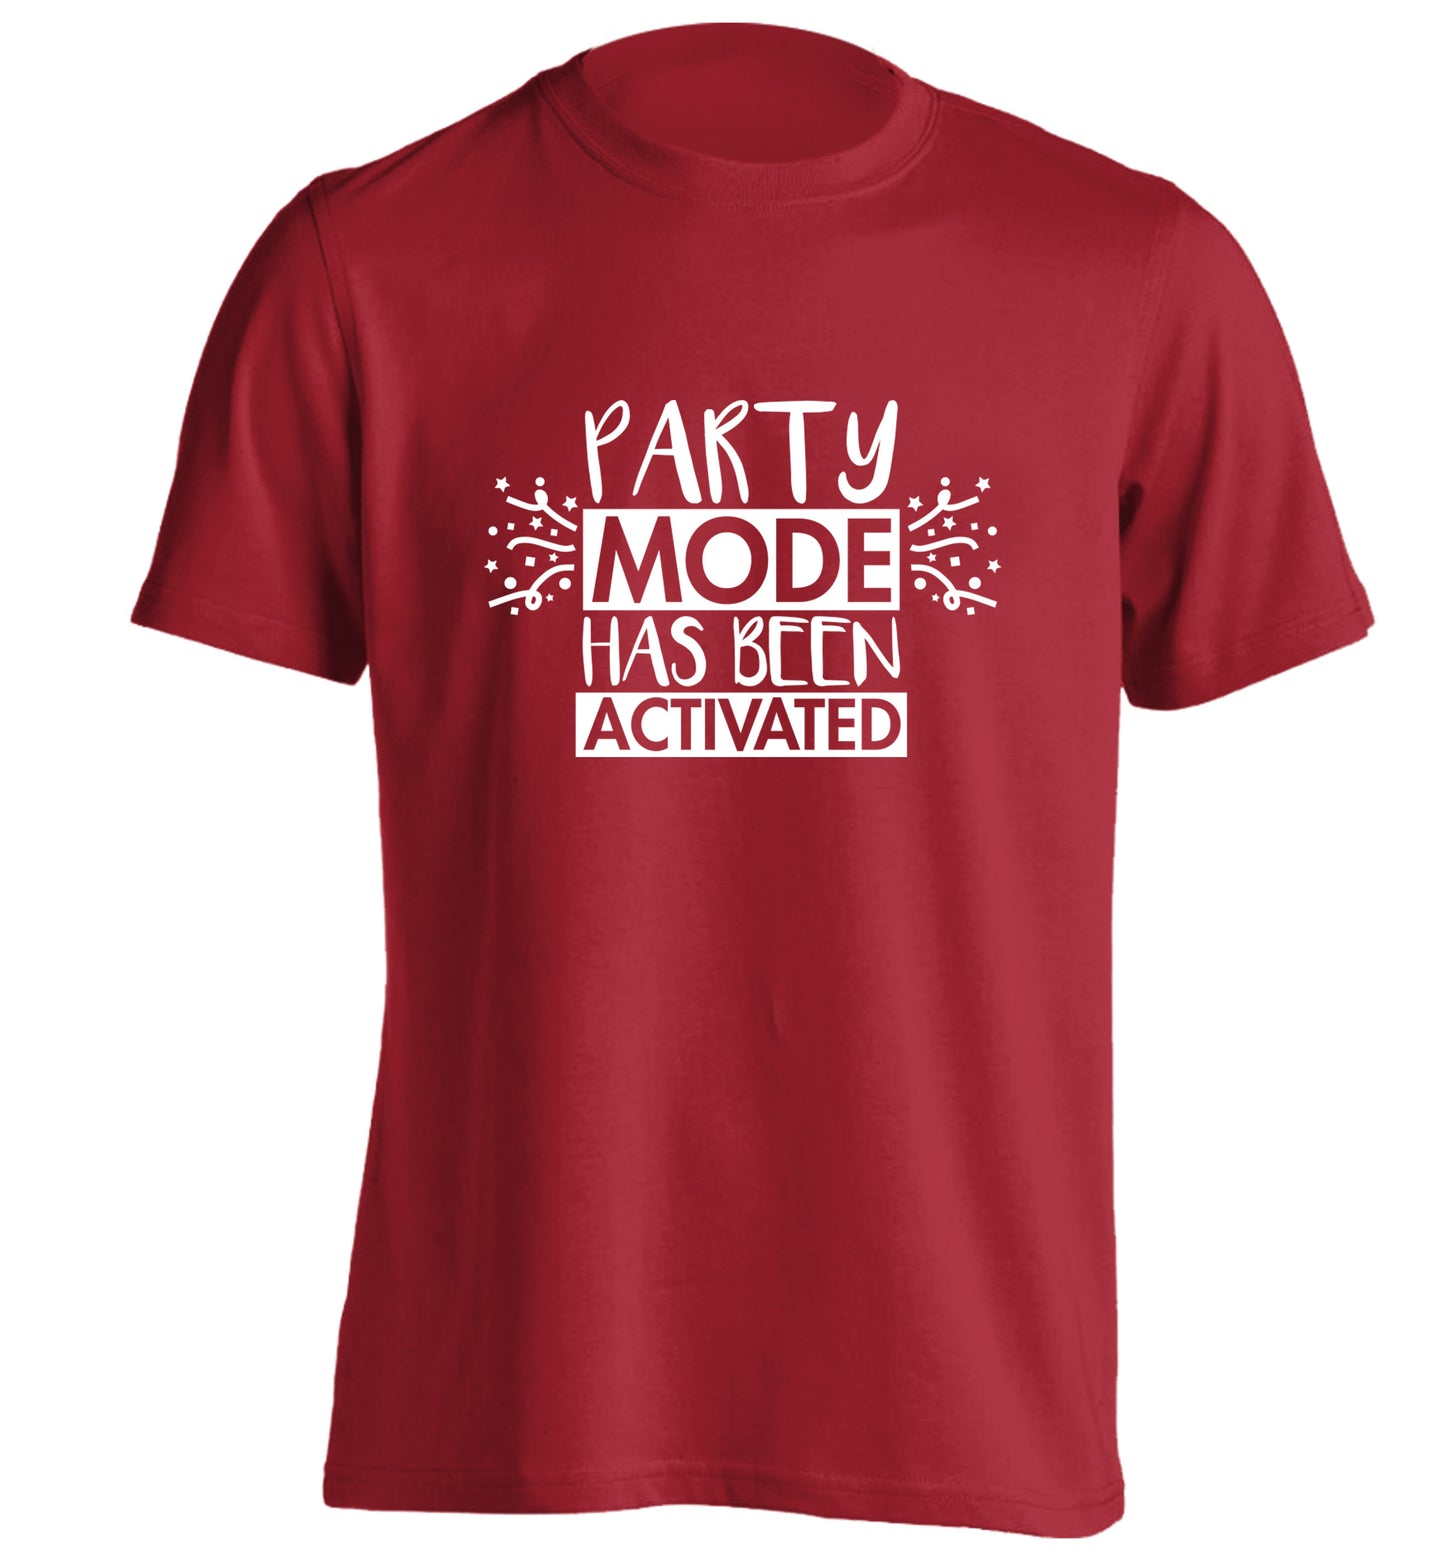 Please do not disturb party mode has been activated adults unisex red Tshirt 2XL